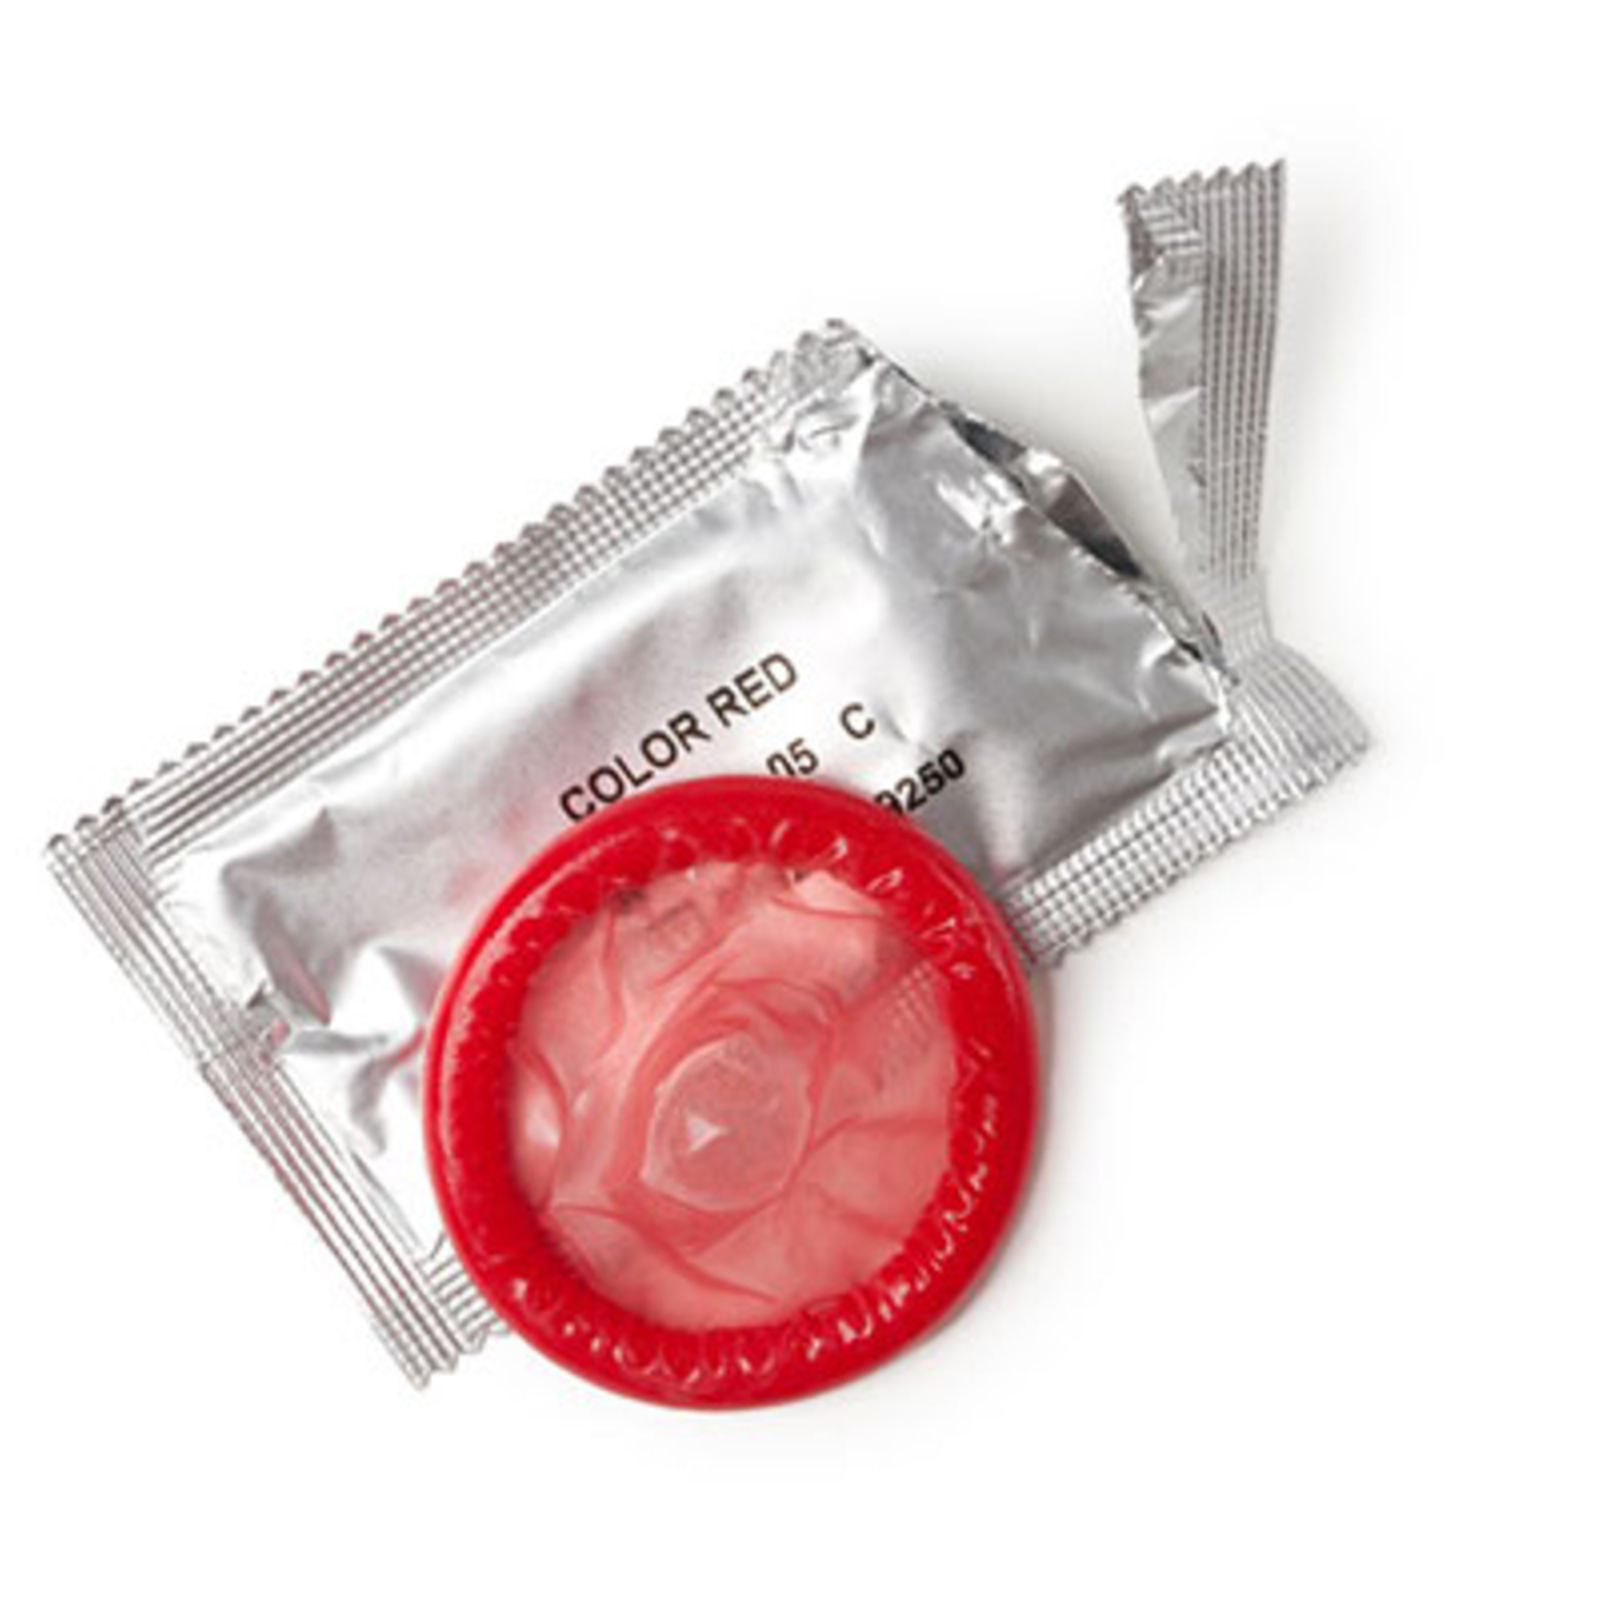 My wife wants us to use condoms Nation